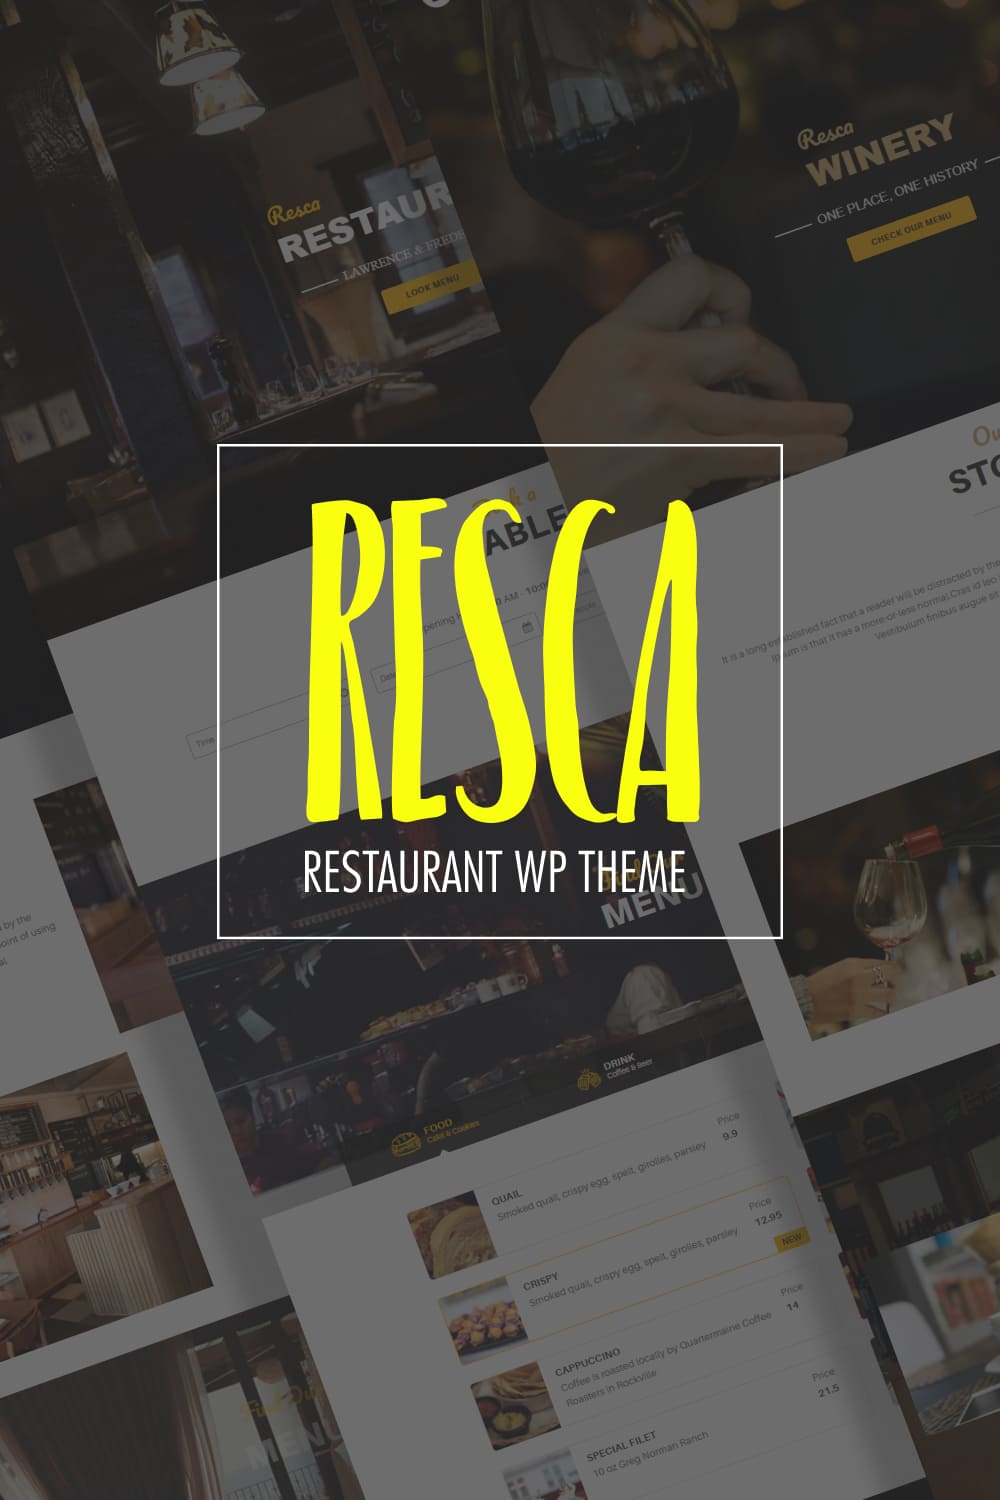 A selection of unique pages of the restaurant WordPress template.